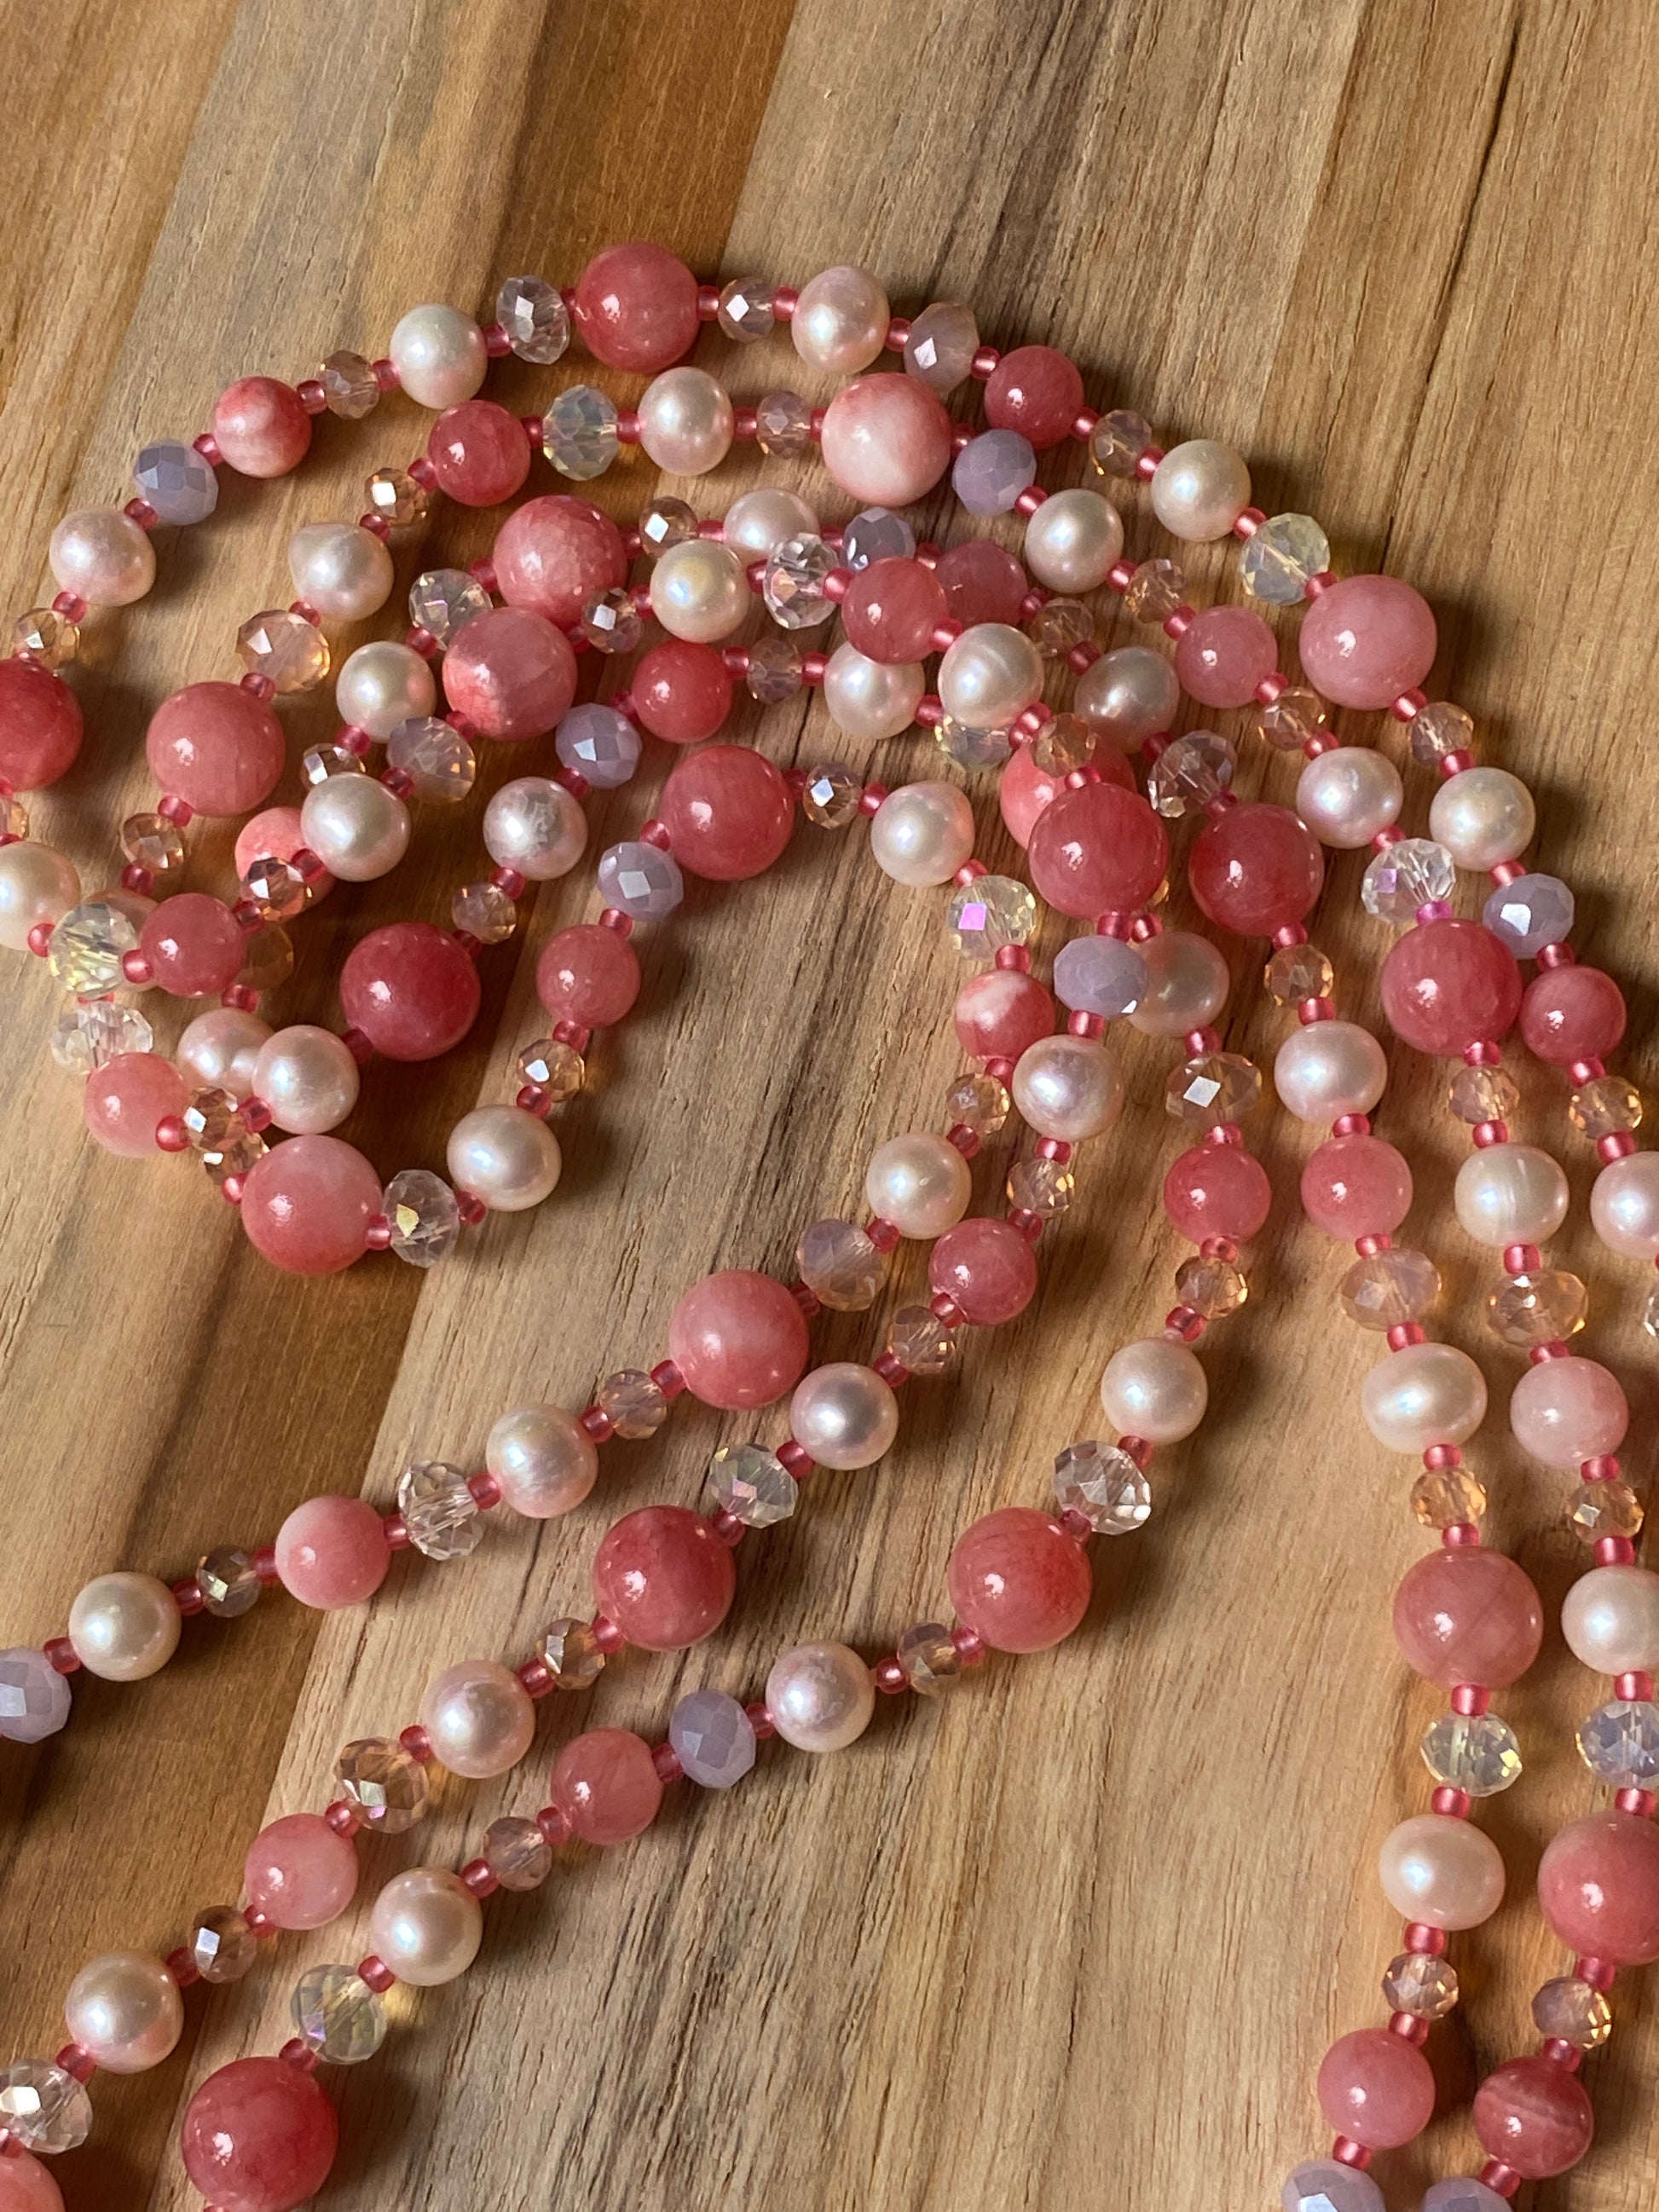 60" Extra Long Wraparound Style Pink/Peach Chalcedony Necklace with Pearl and Crystal Beads - My Urban Gems